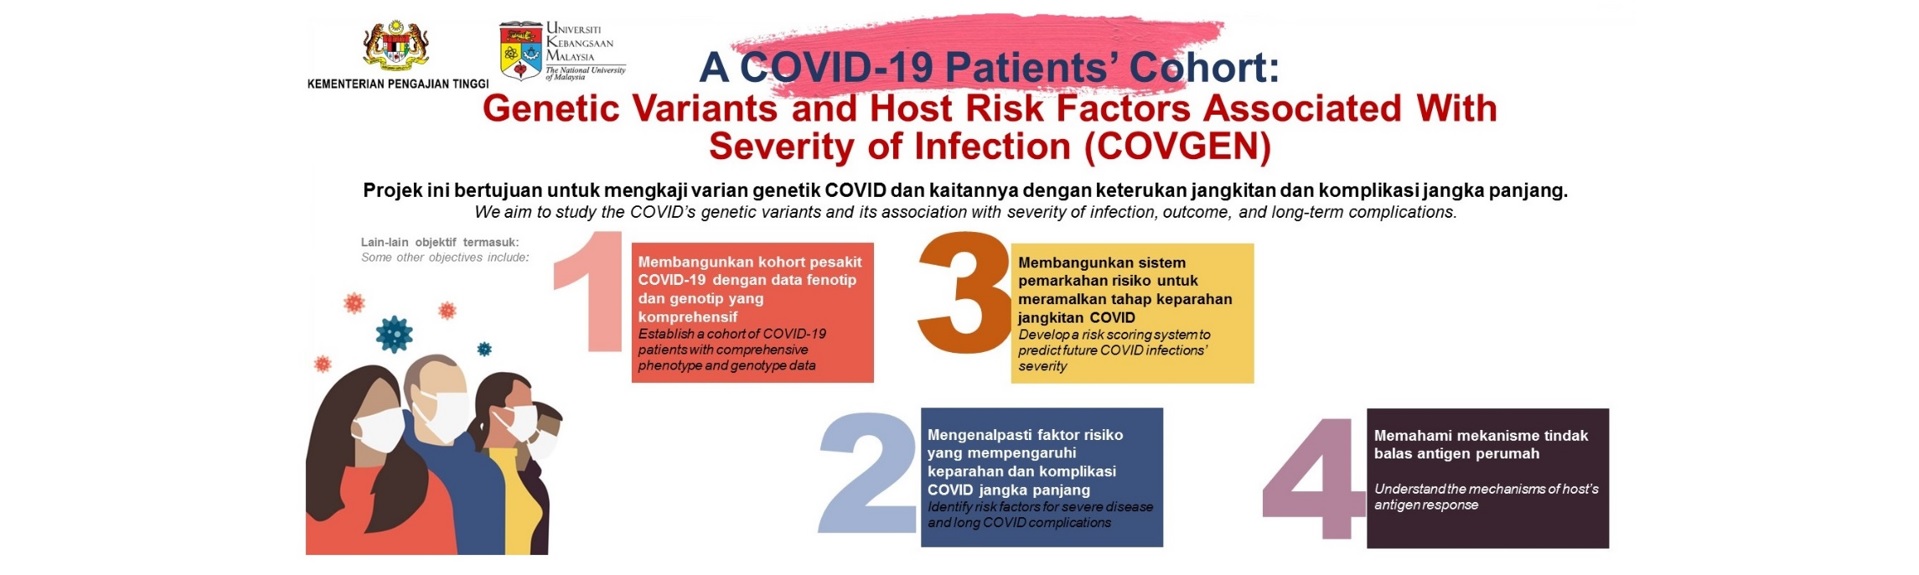 Genetic Variants and Host Risk Factors Associated With Severity of Infection (COVGEN)